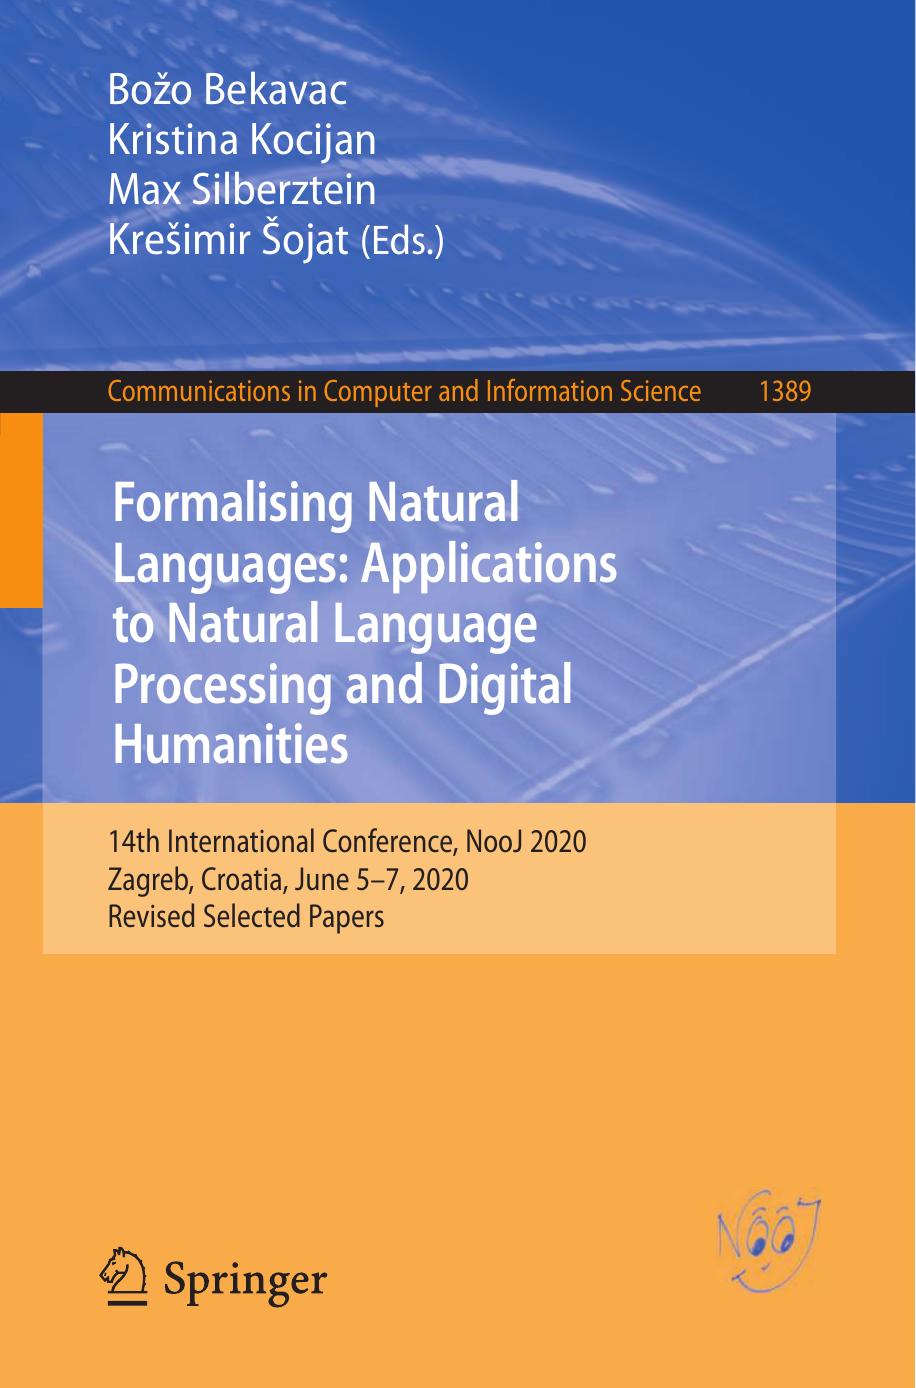 Formalising Natural Languages: Applications to Natural Language Processing and Digital Humanities: 14th International Conference, NooJ 2020, Zagreb, Croatia, June 5–7, 2020, Revised Selected Papers